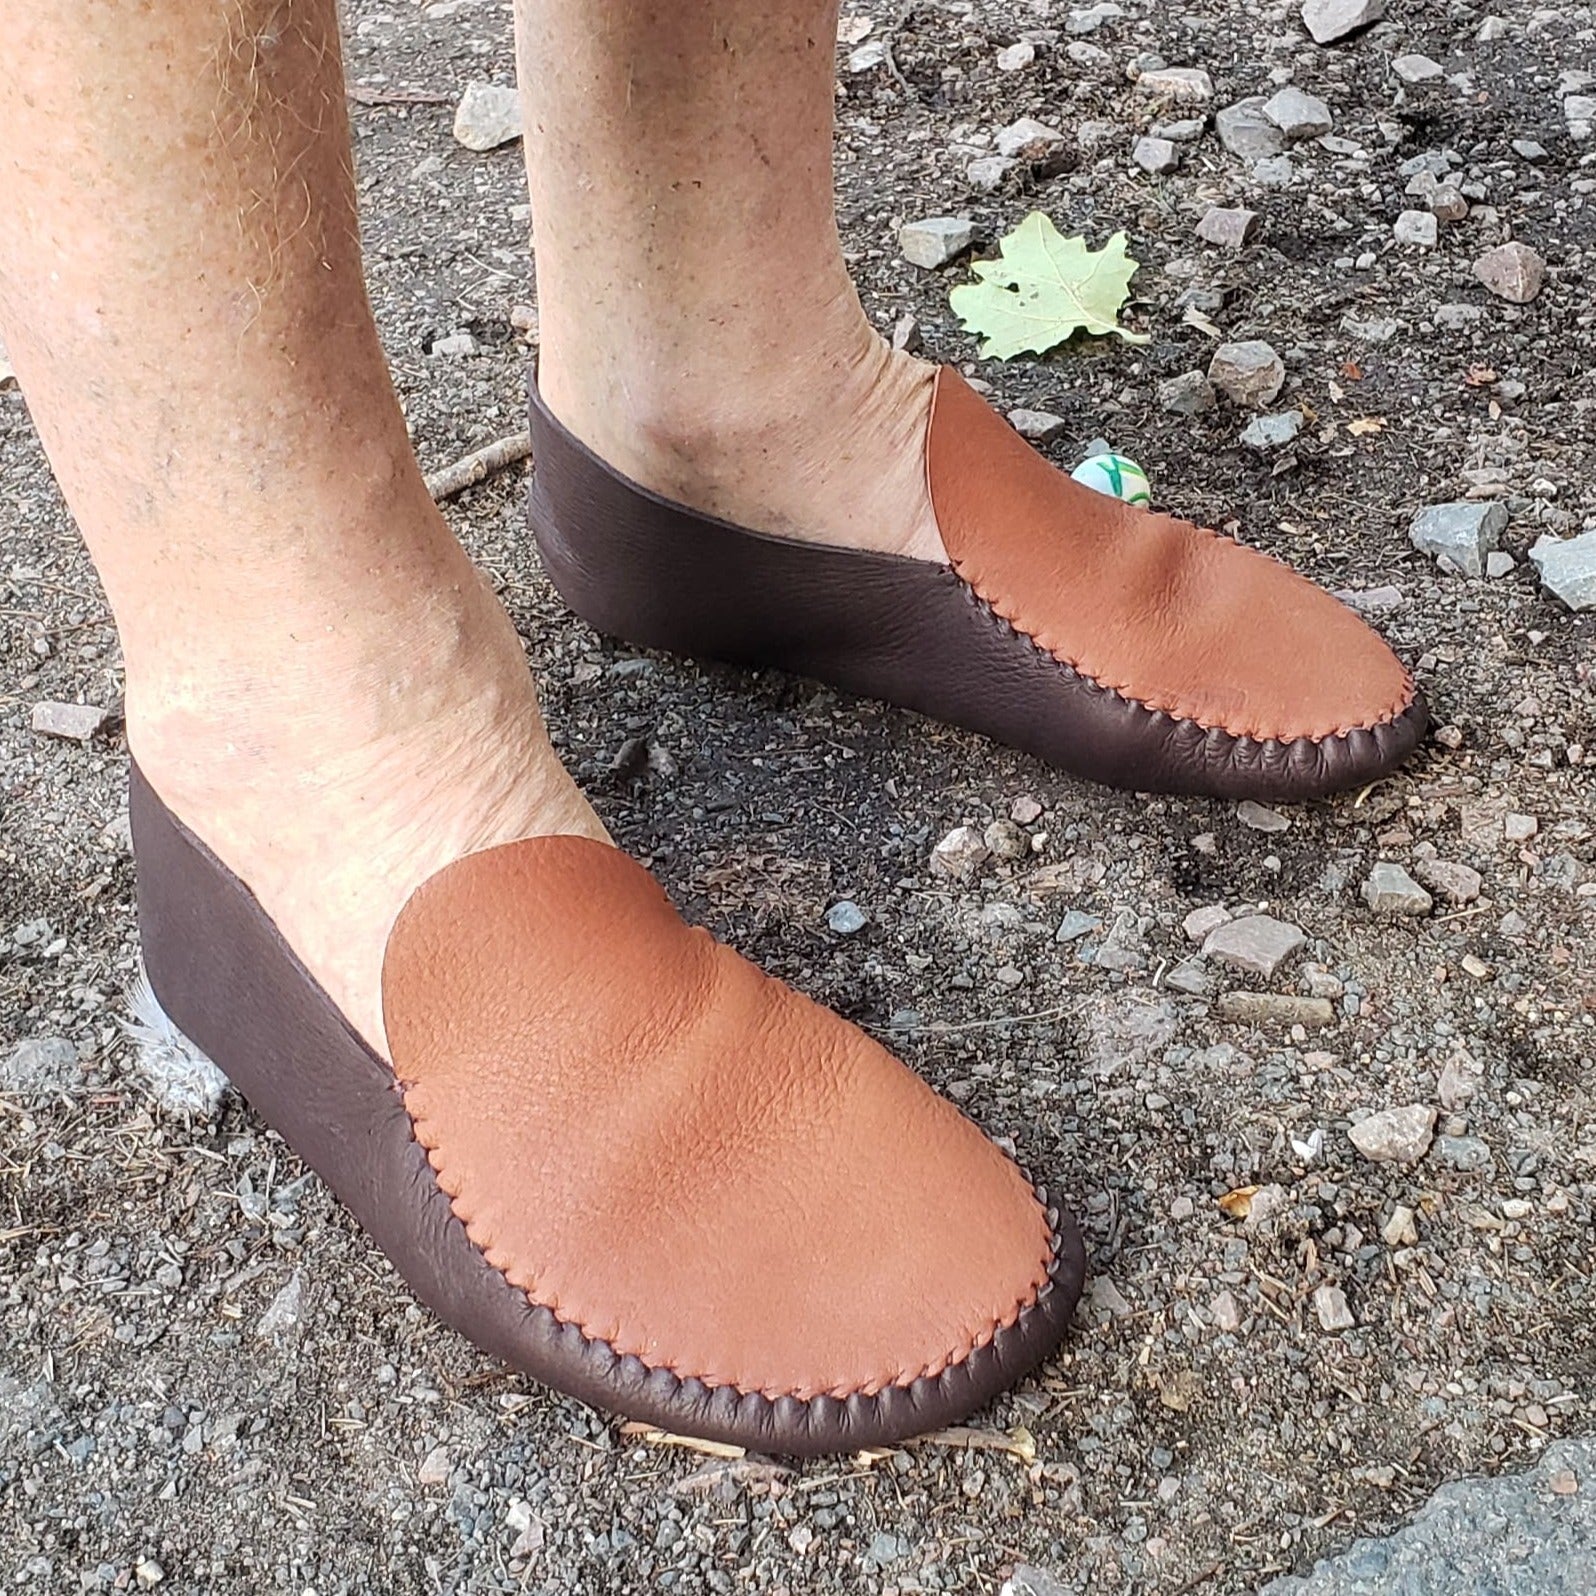 Barefoot Shoes "Leaf" Style